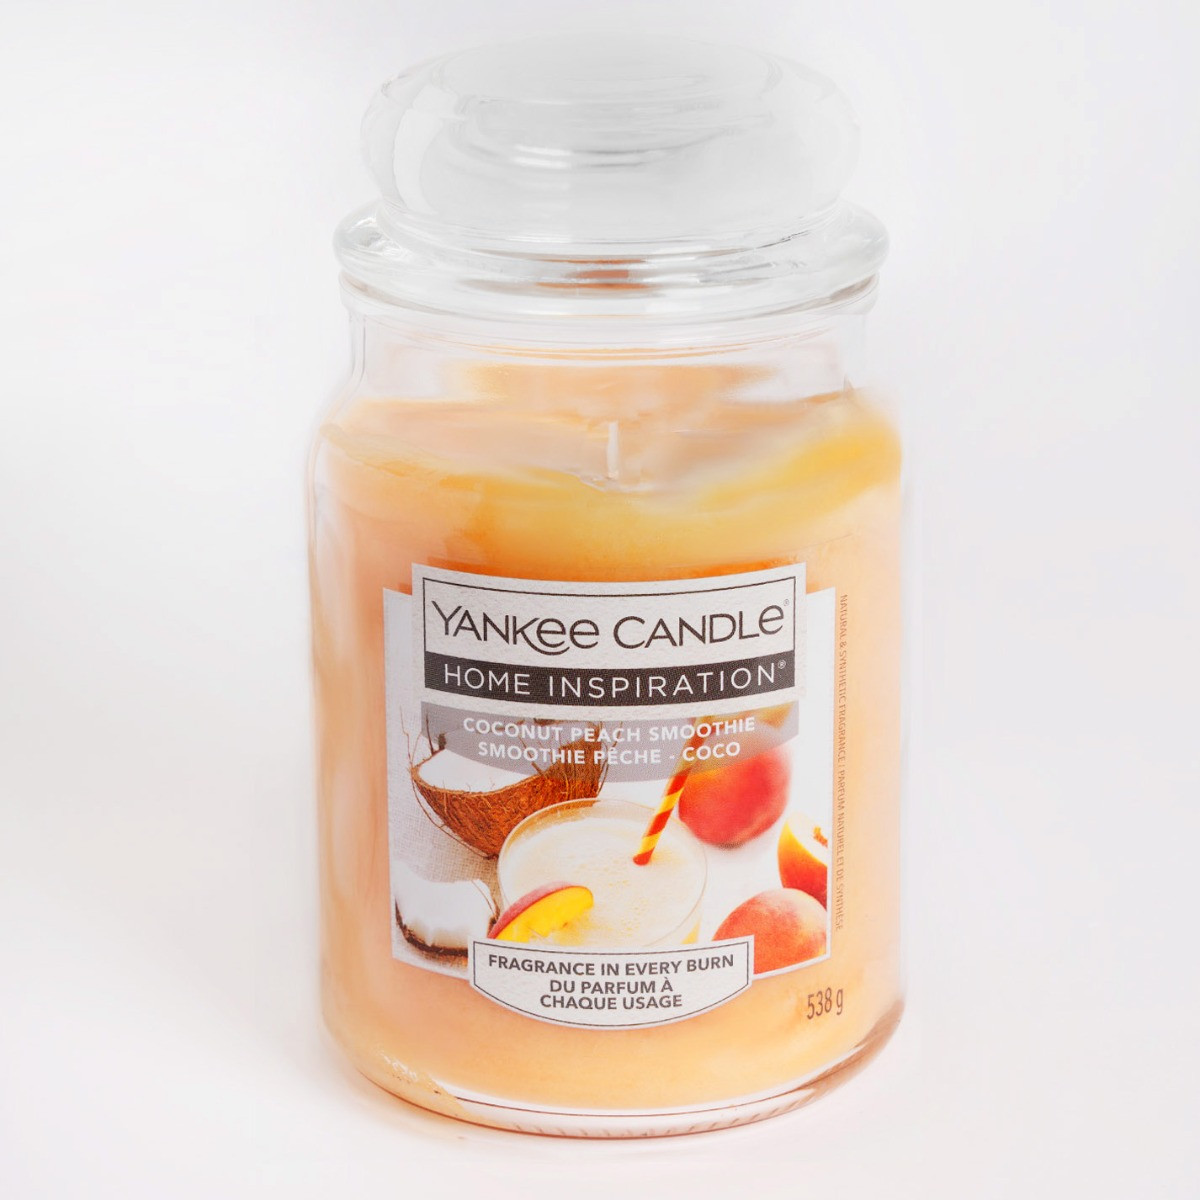 Yankee Candle Home Inspiration Large Jar - Coconut Peach Smoothie>